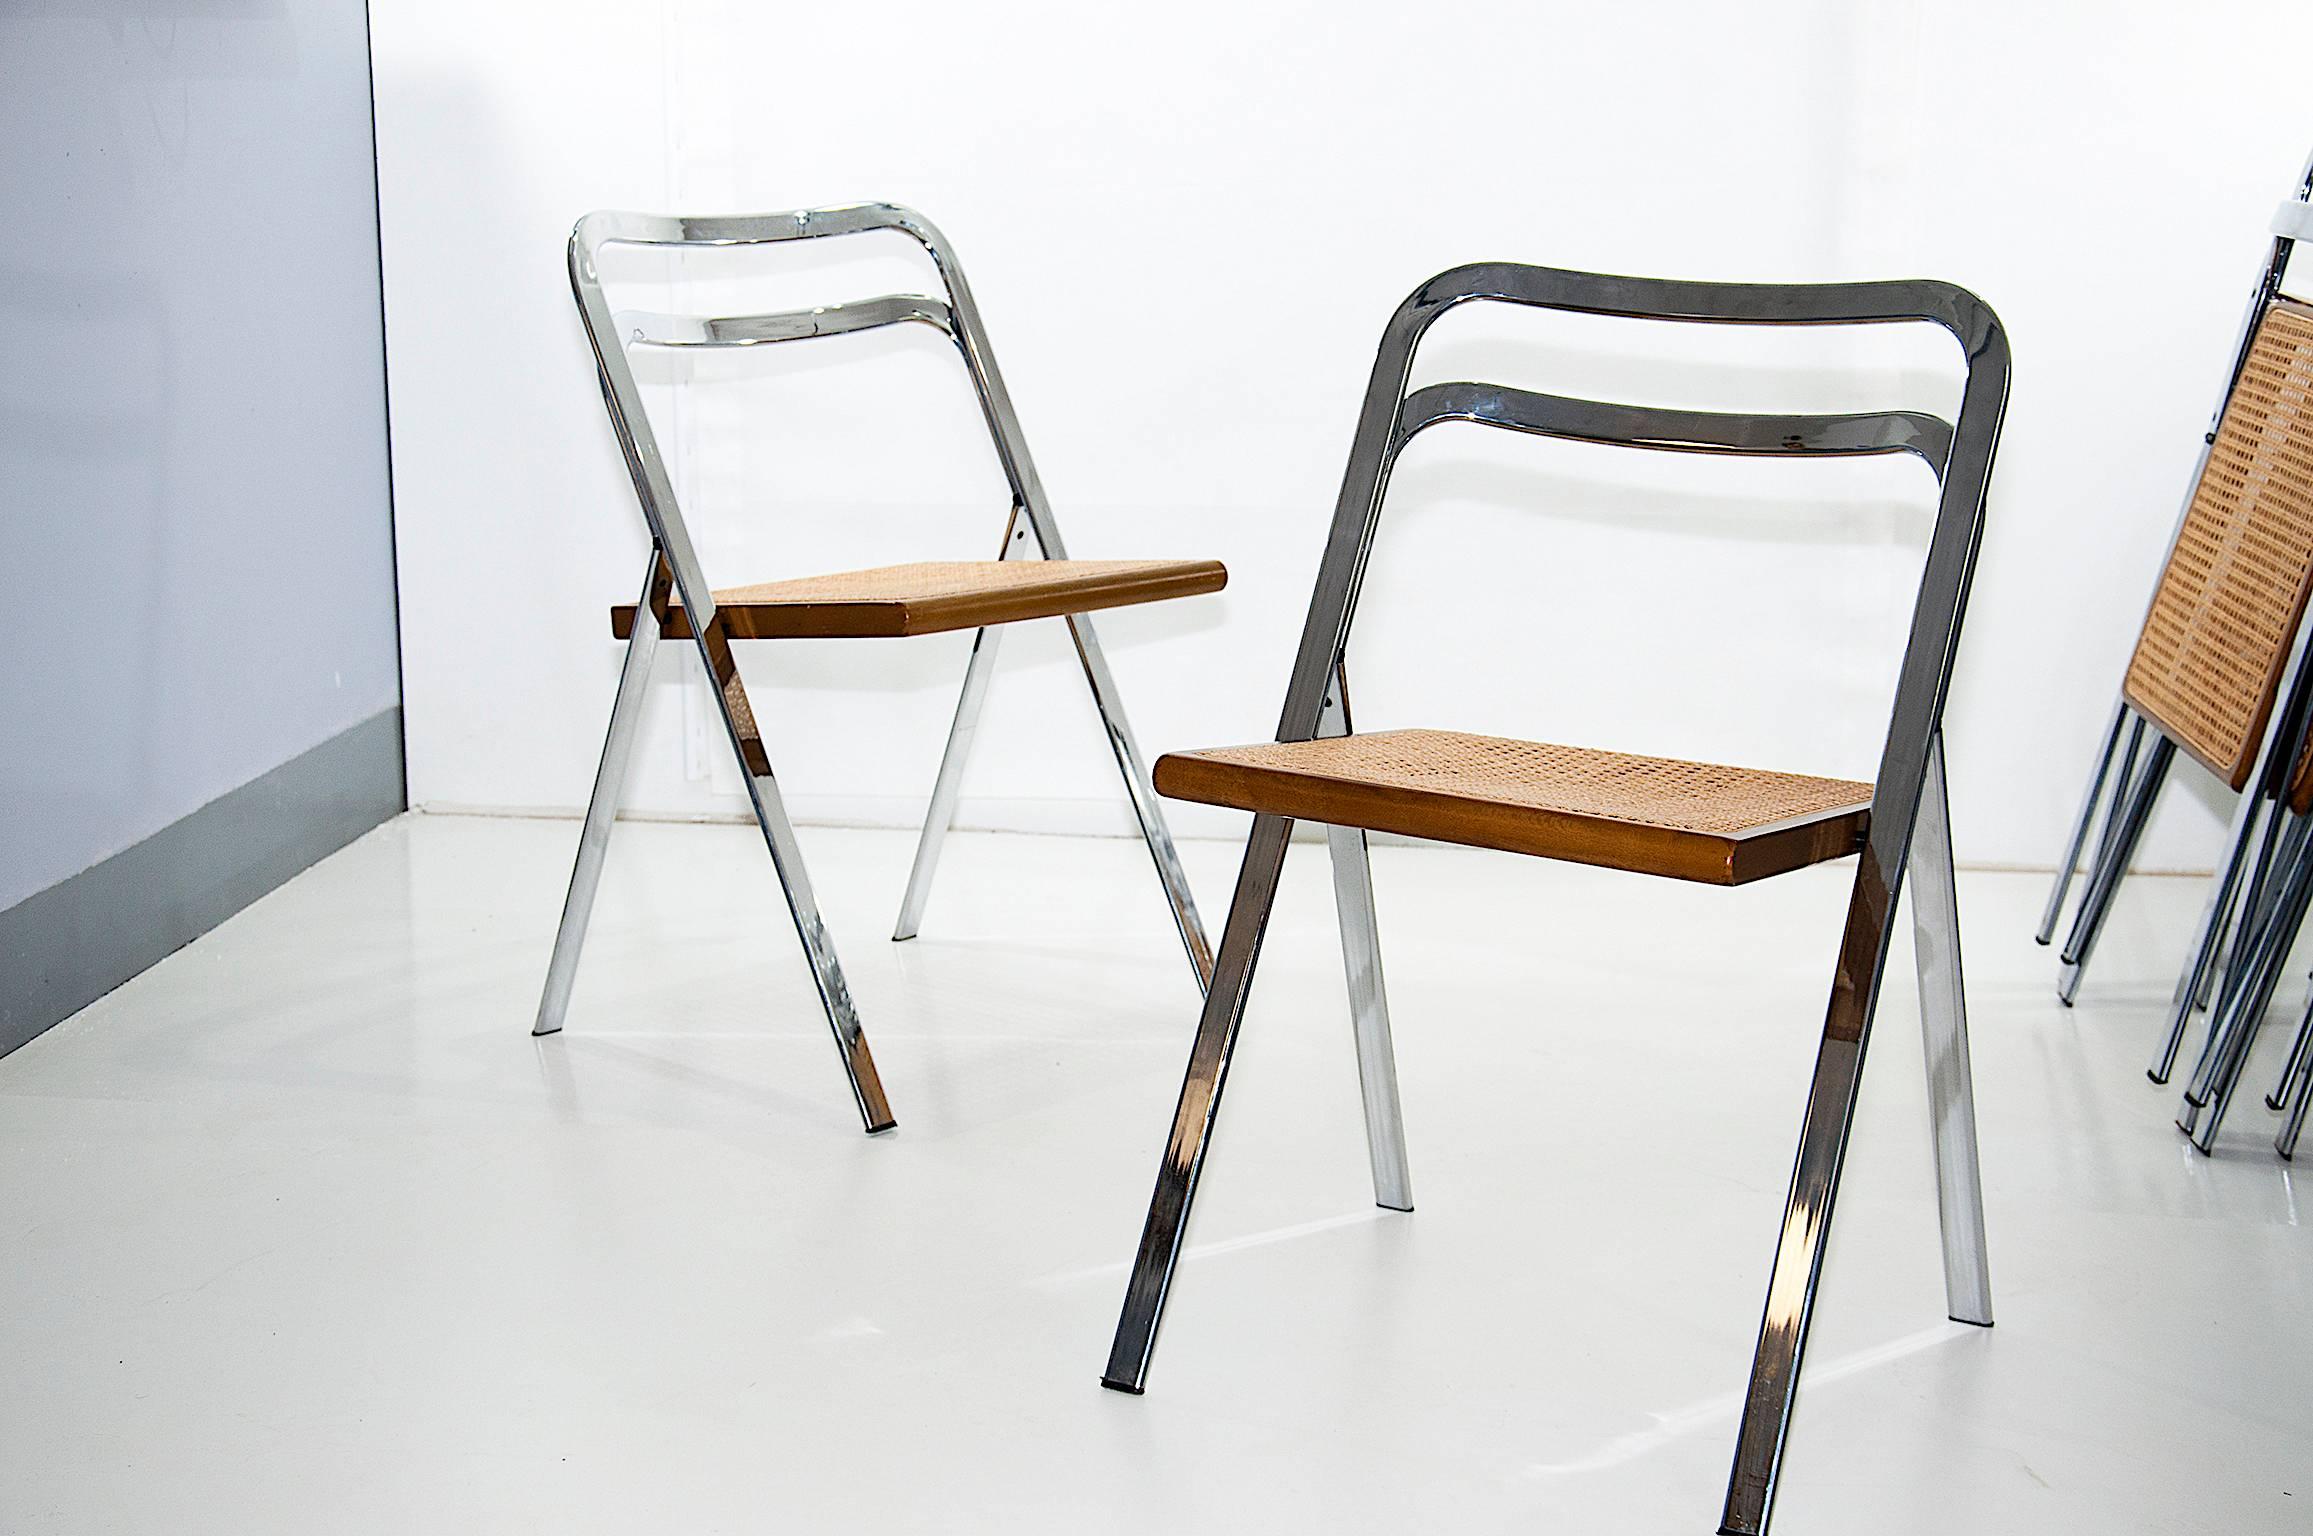 Space Age Set of Eight Chromed Folding Chairs, in Beech by Giorgio Cattelan for Cidue